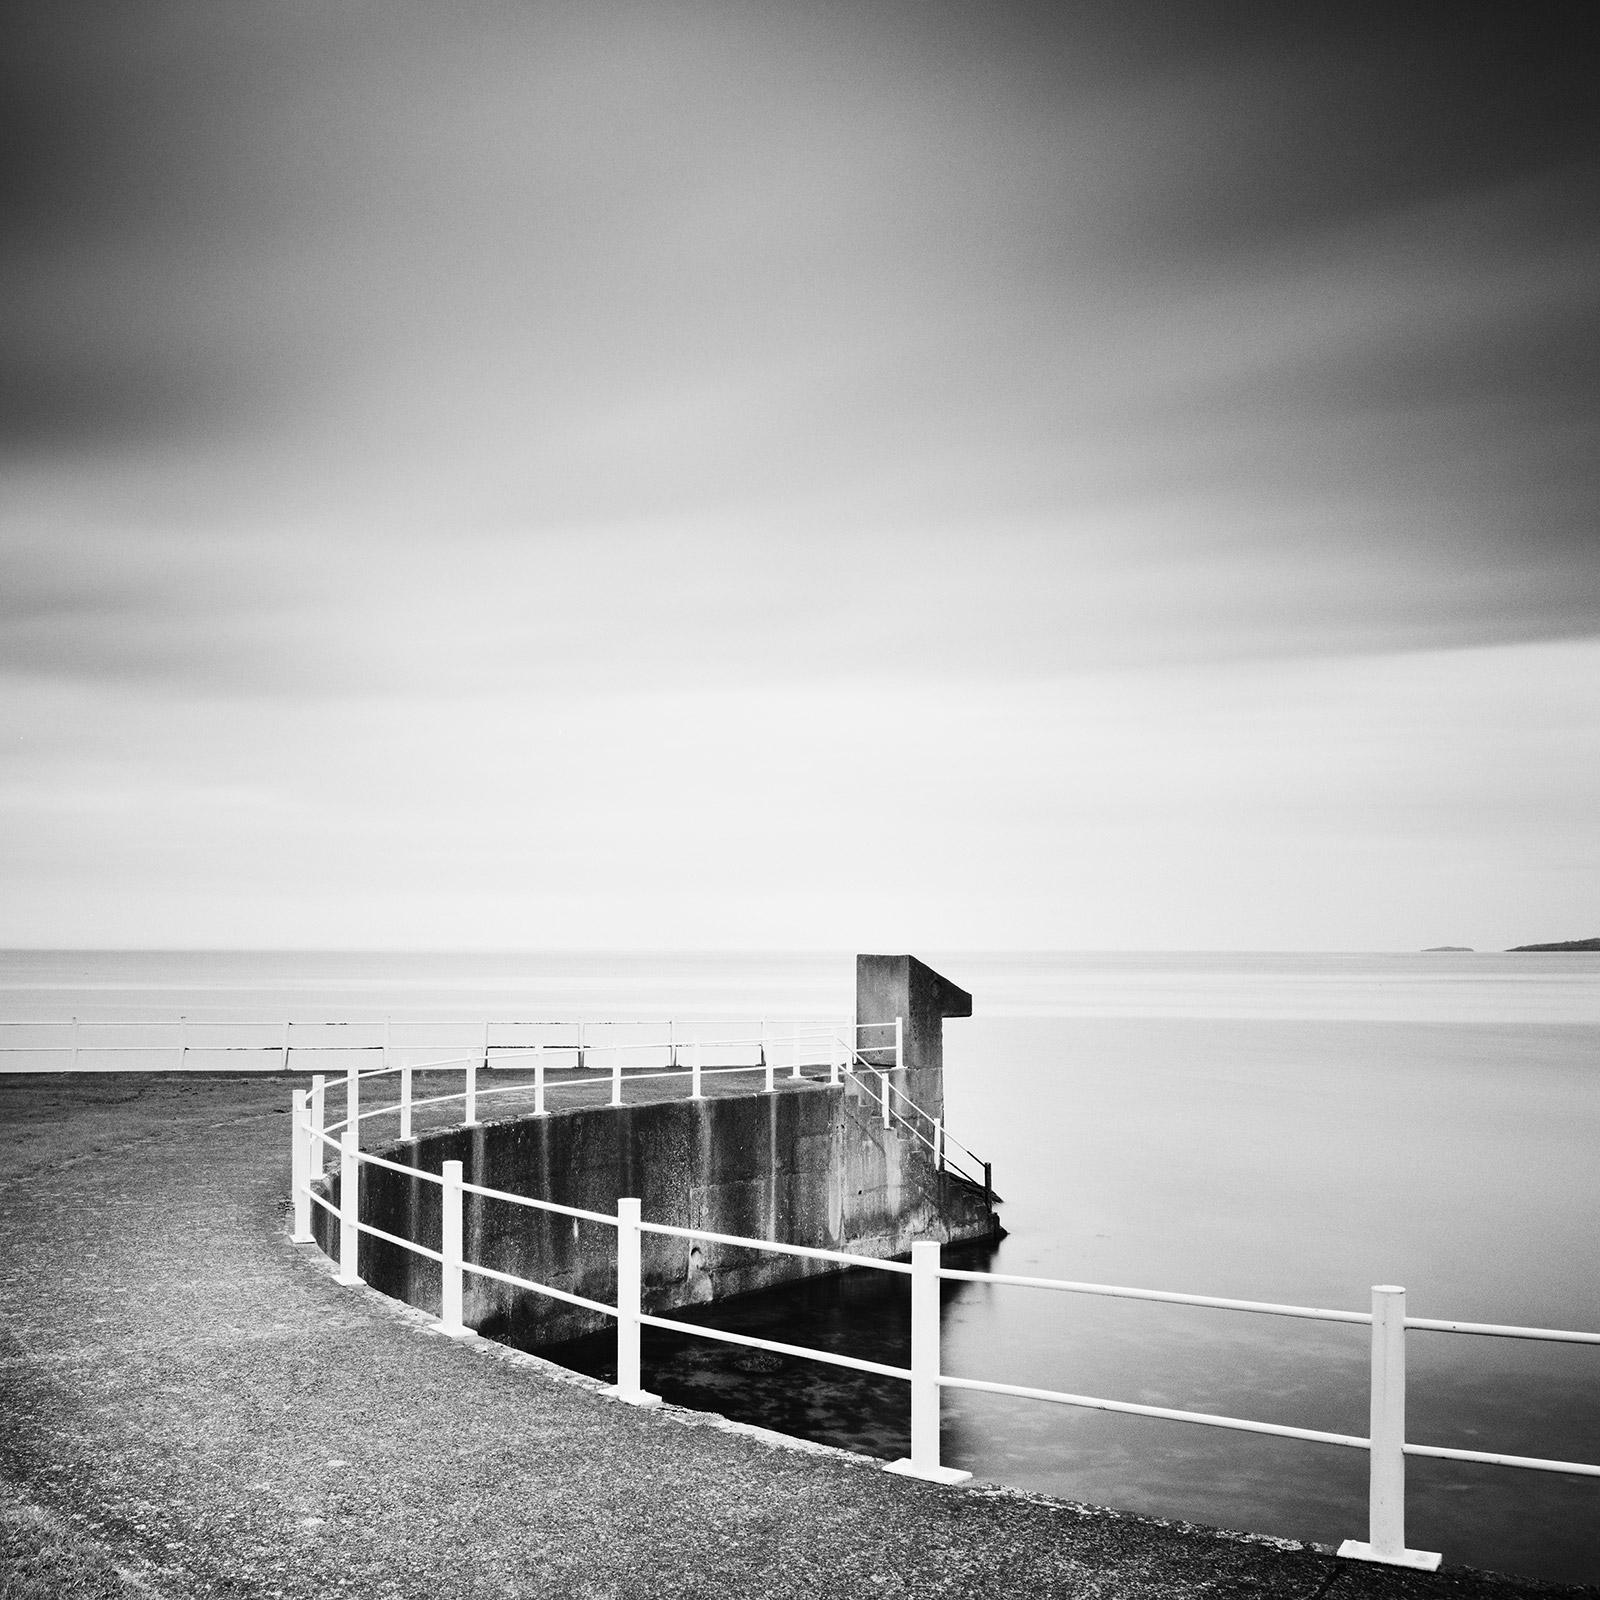 Gerald Berghammer Black and White Photograph - Seaside, Promenade, Ireland, black and white waterscape landscape photography